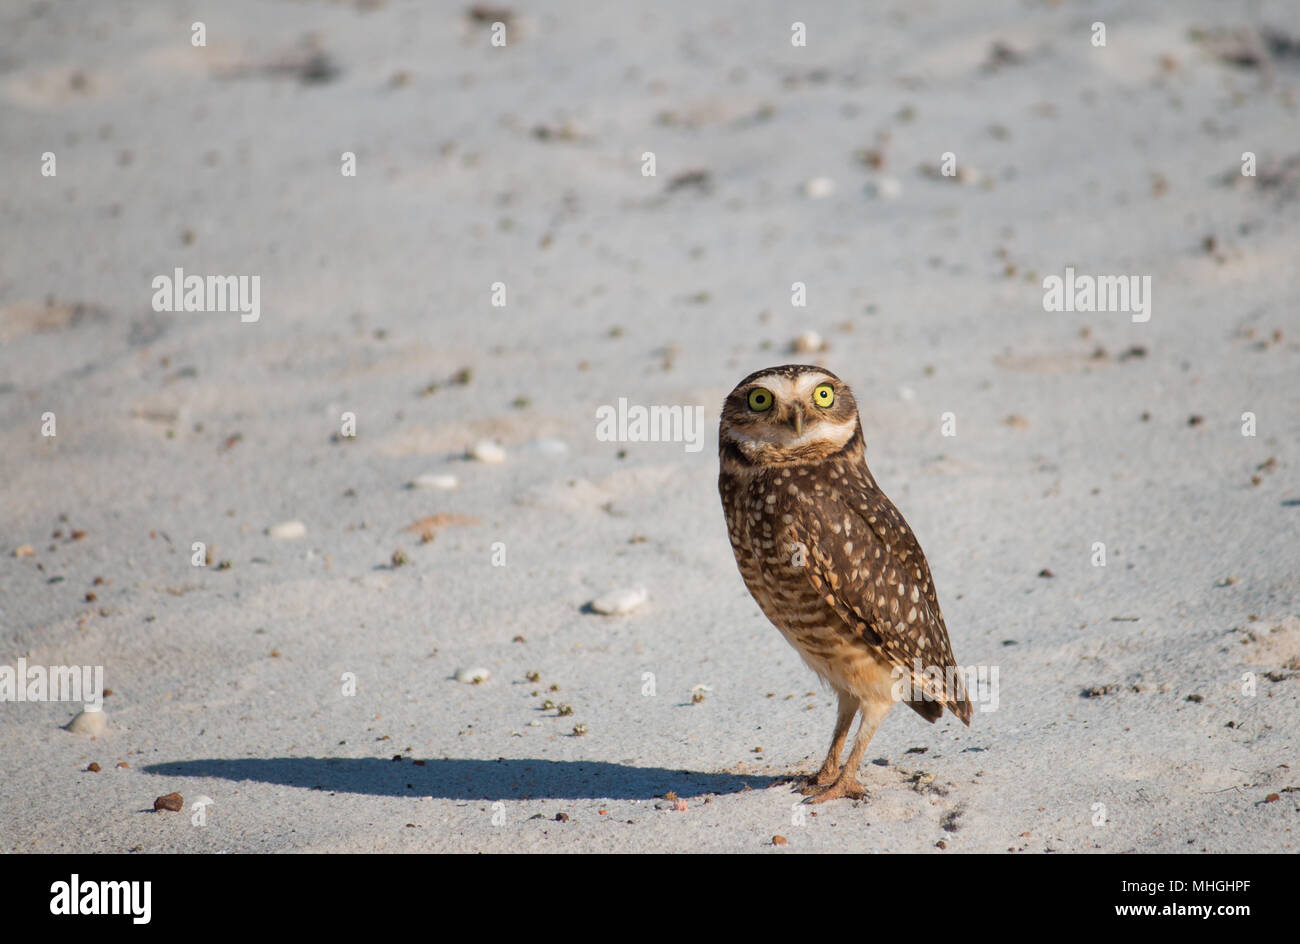 Burrowing owl. Bird isolated in its natural habitat. Stock Photo